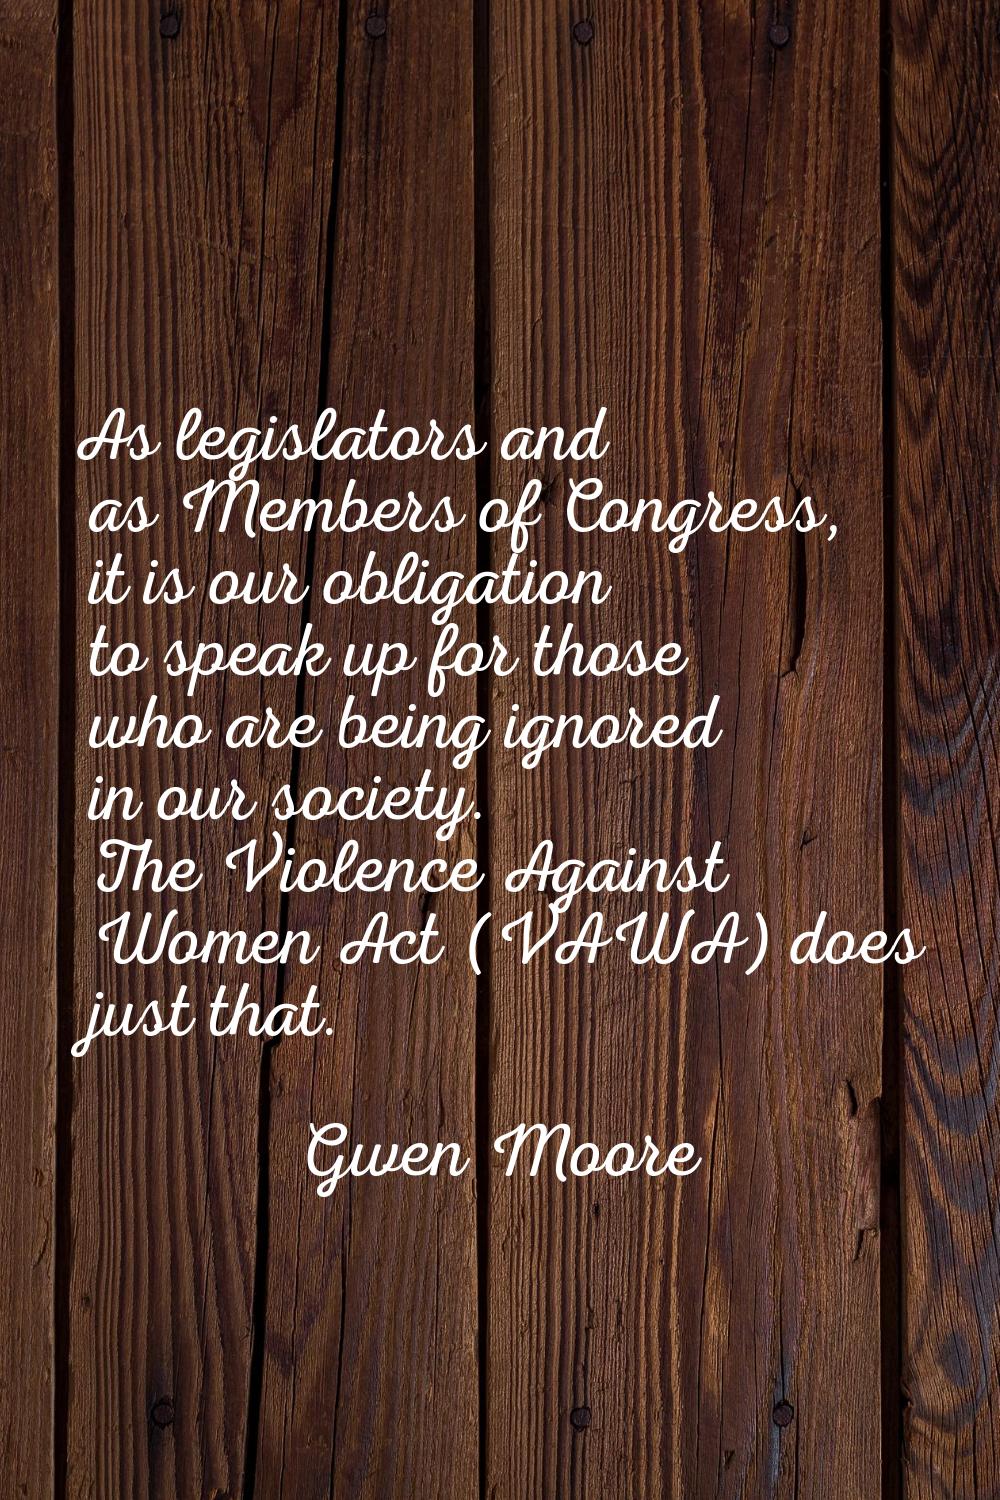 As legislators and as Members of Congress, it is our obligation to speak up for those who are being